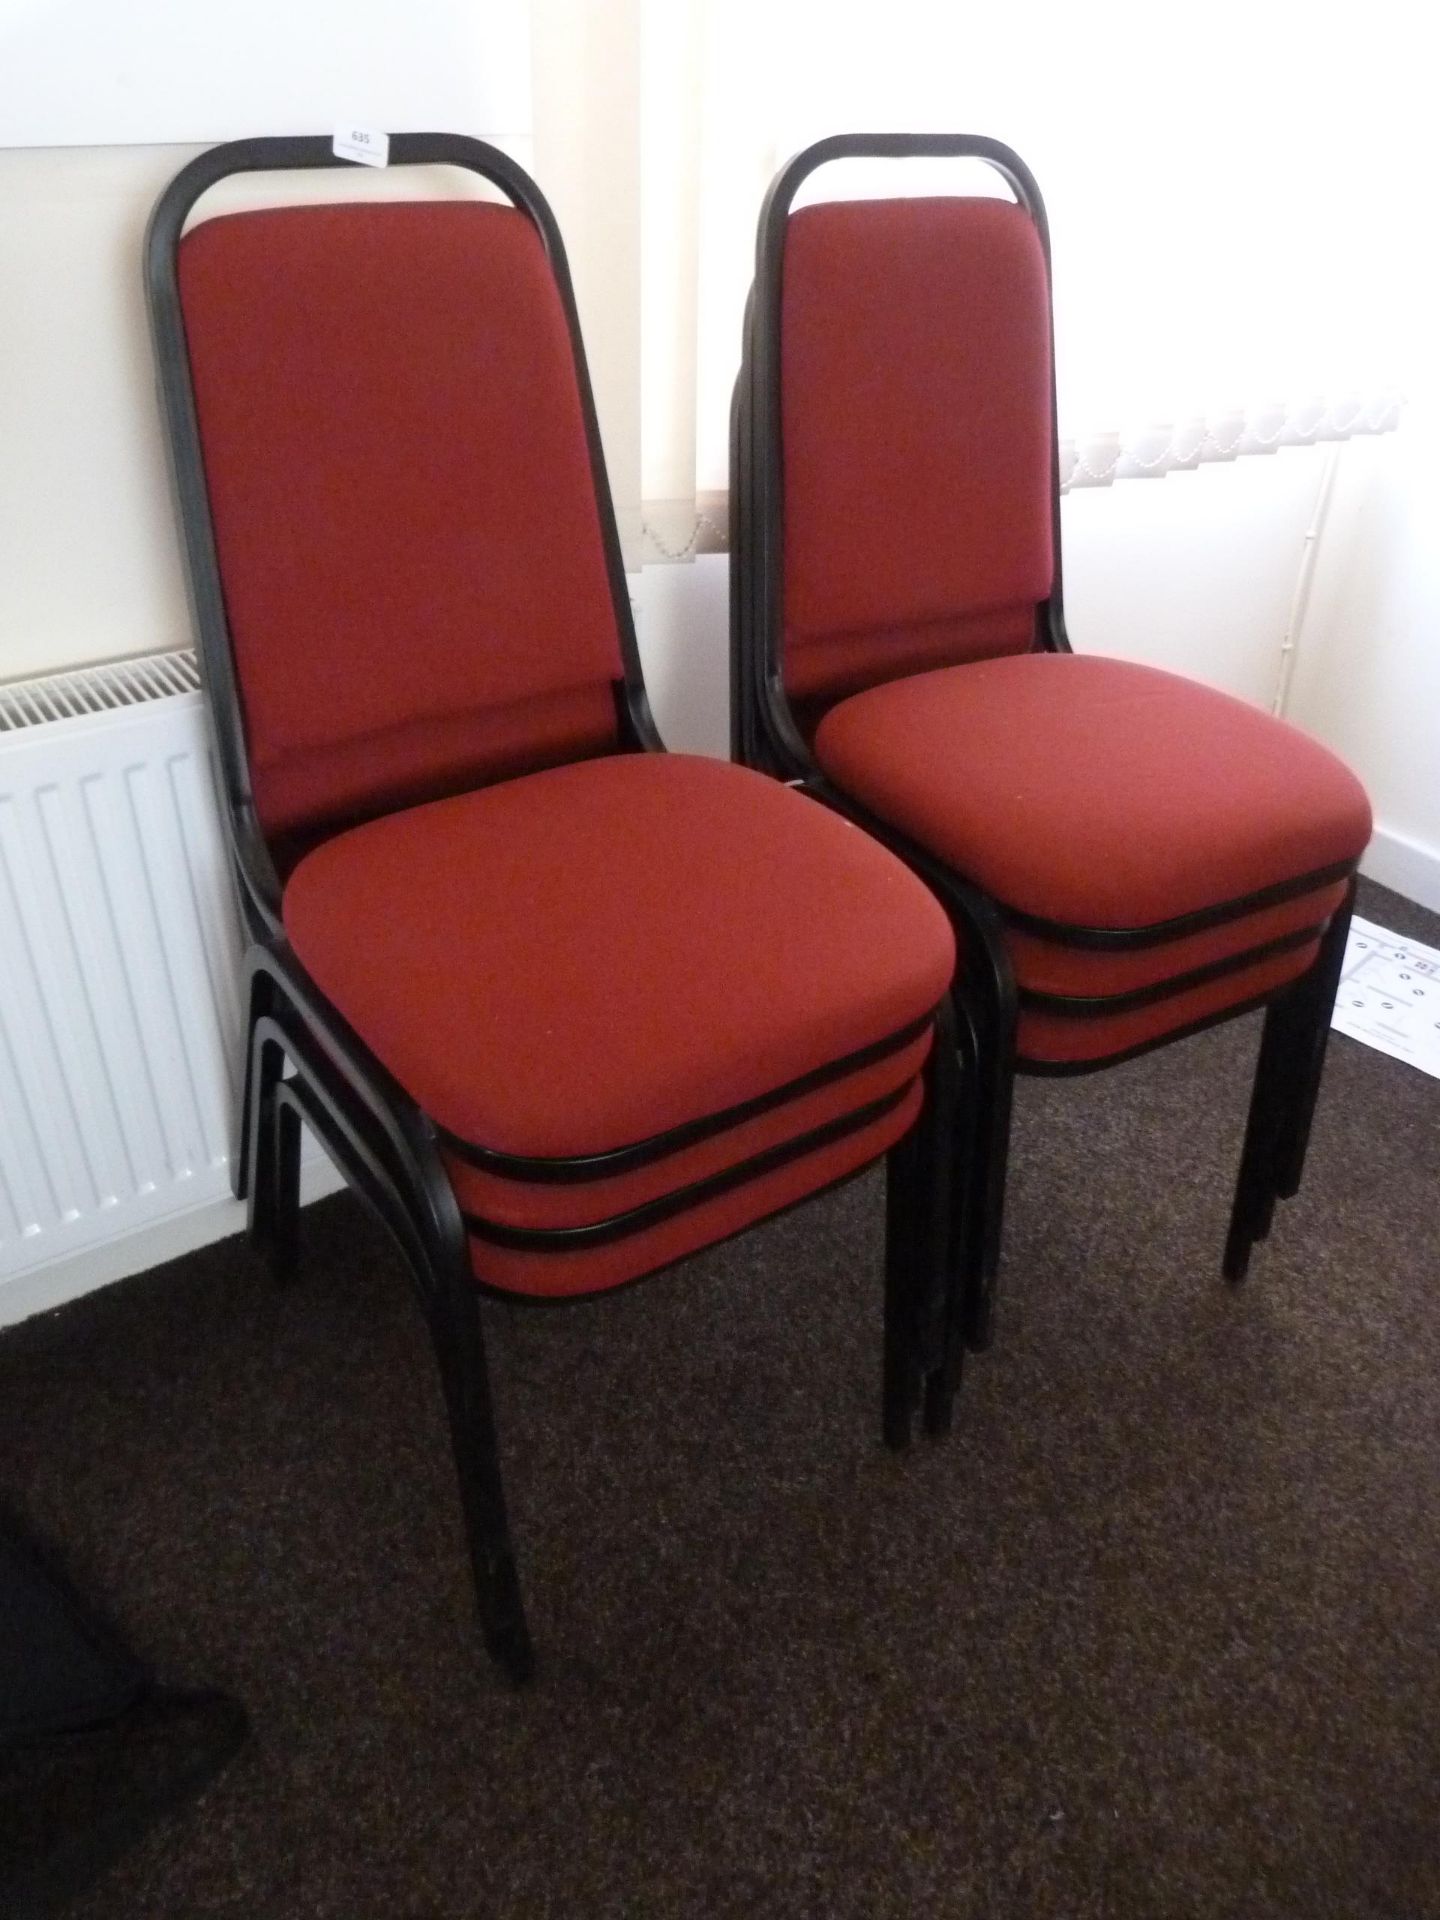 *Six Red Stackable Chairs